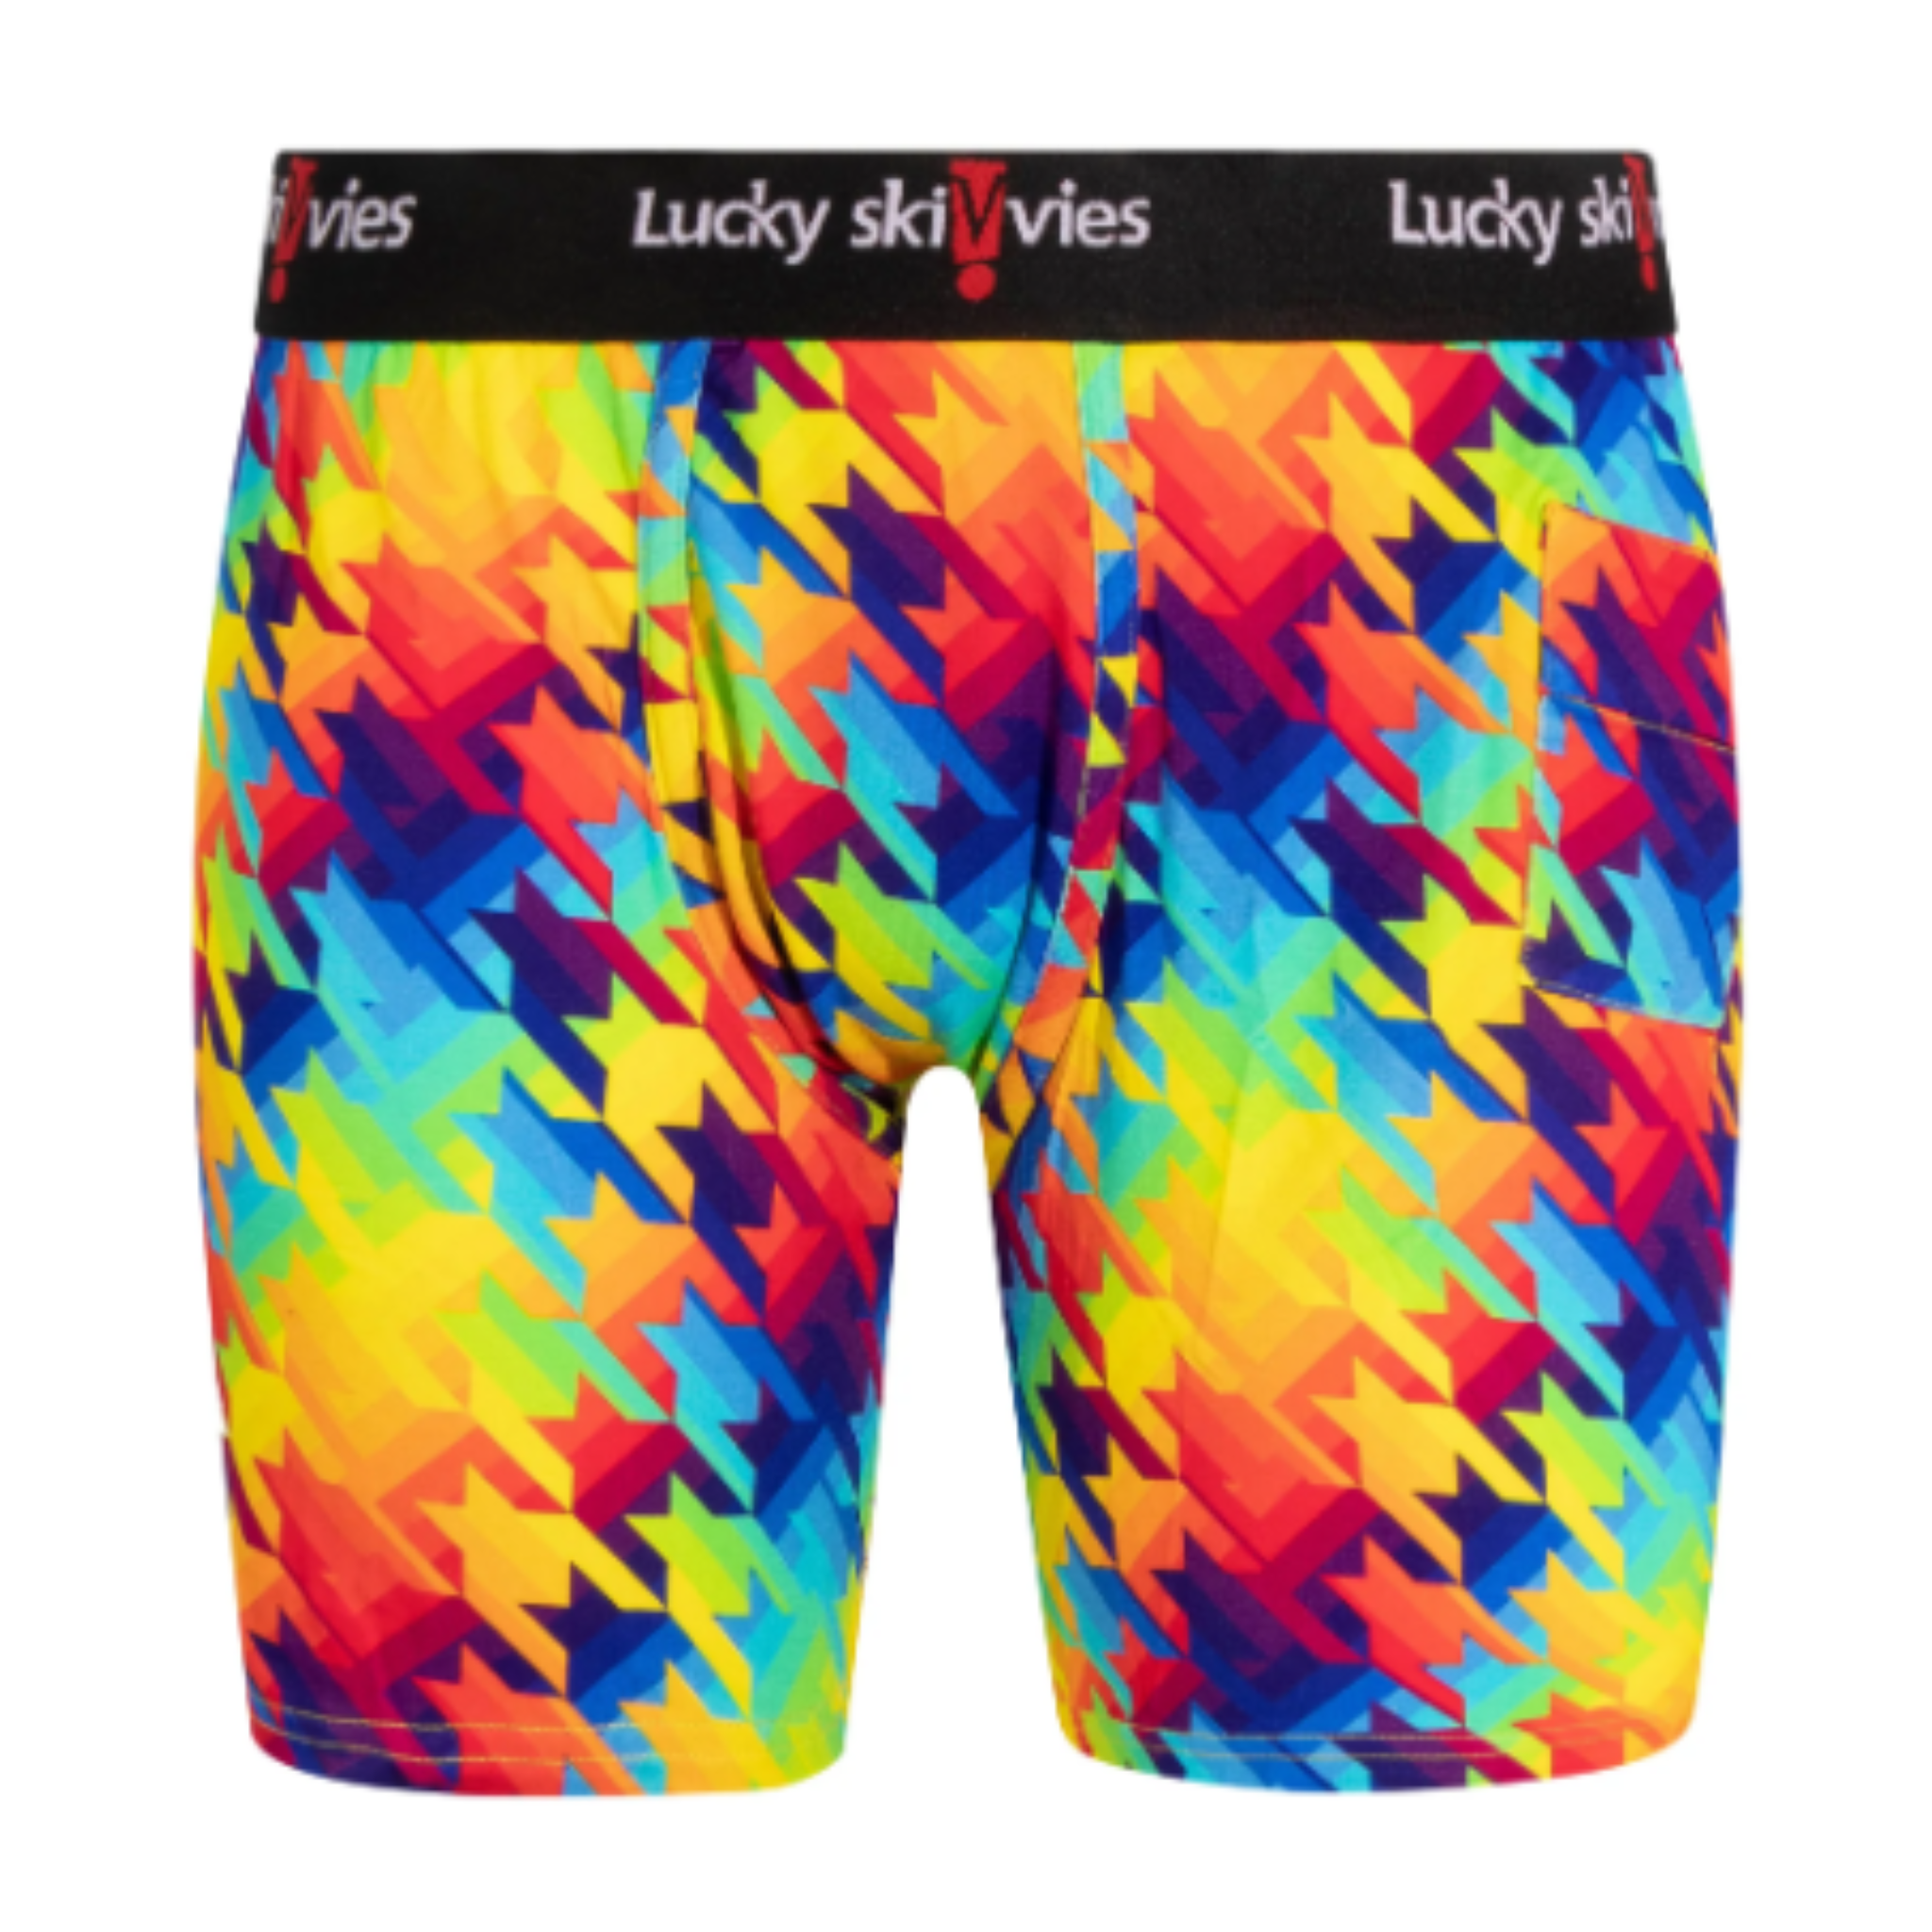 Rainbow Feather Gender Neutral Boxer Briefs by Lucky Skivvies